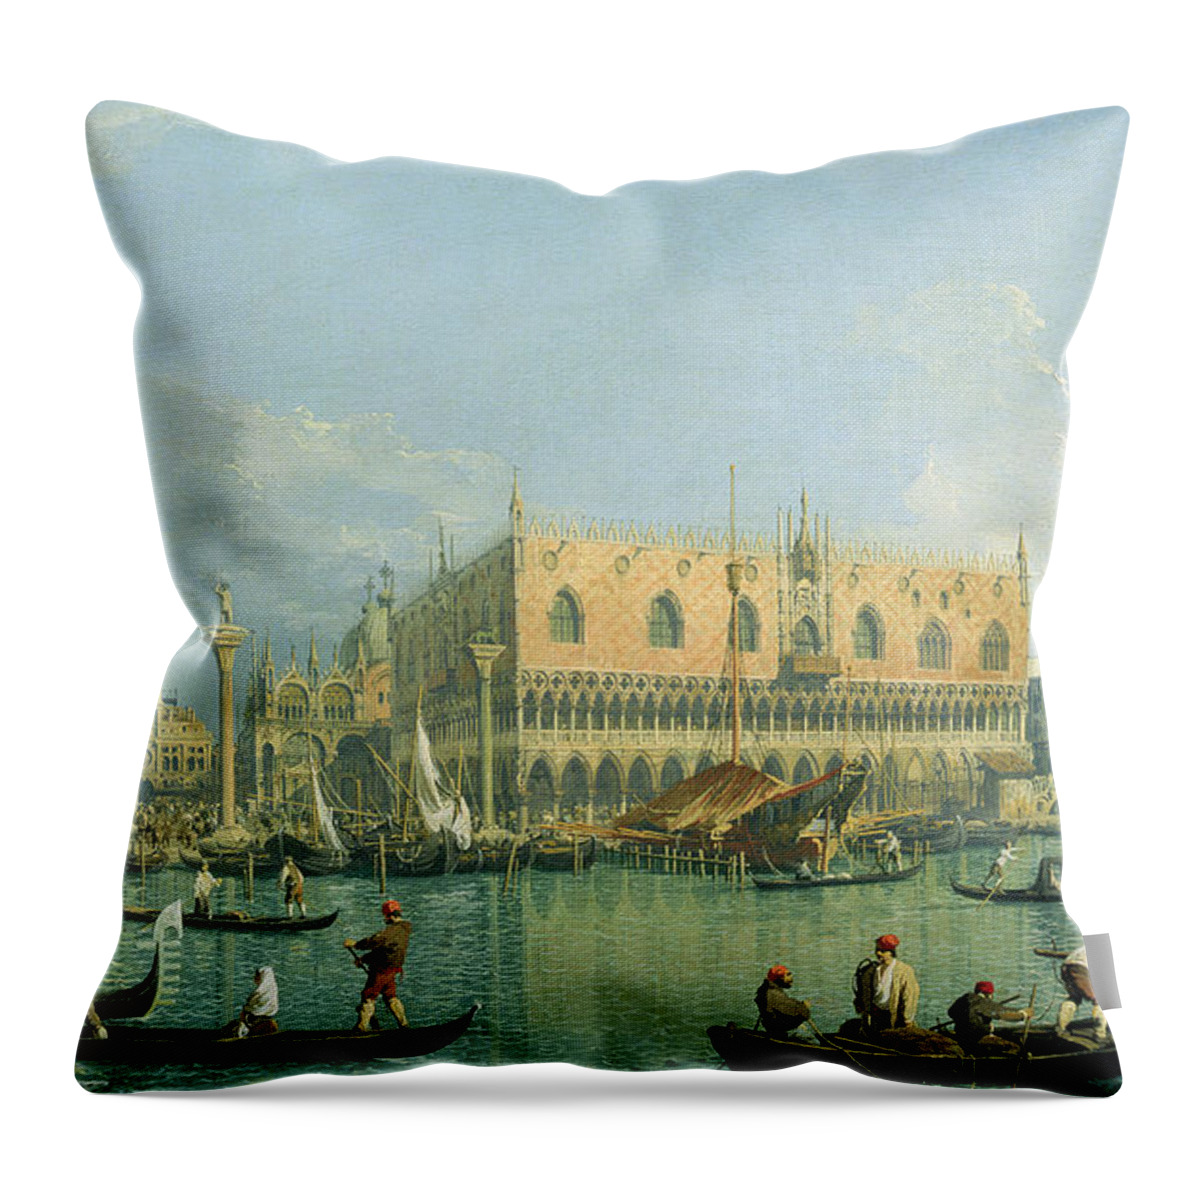 Venetian Throw Pillow featuring the painting Ducal Palace  Venice by Canaletto